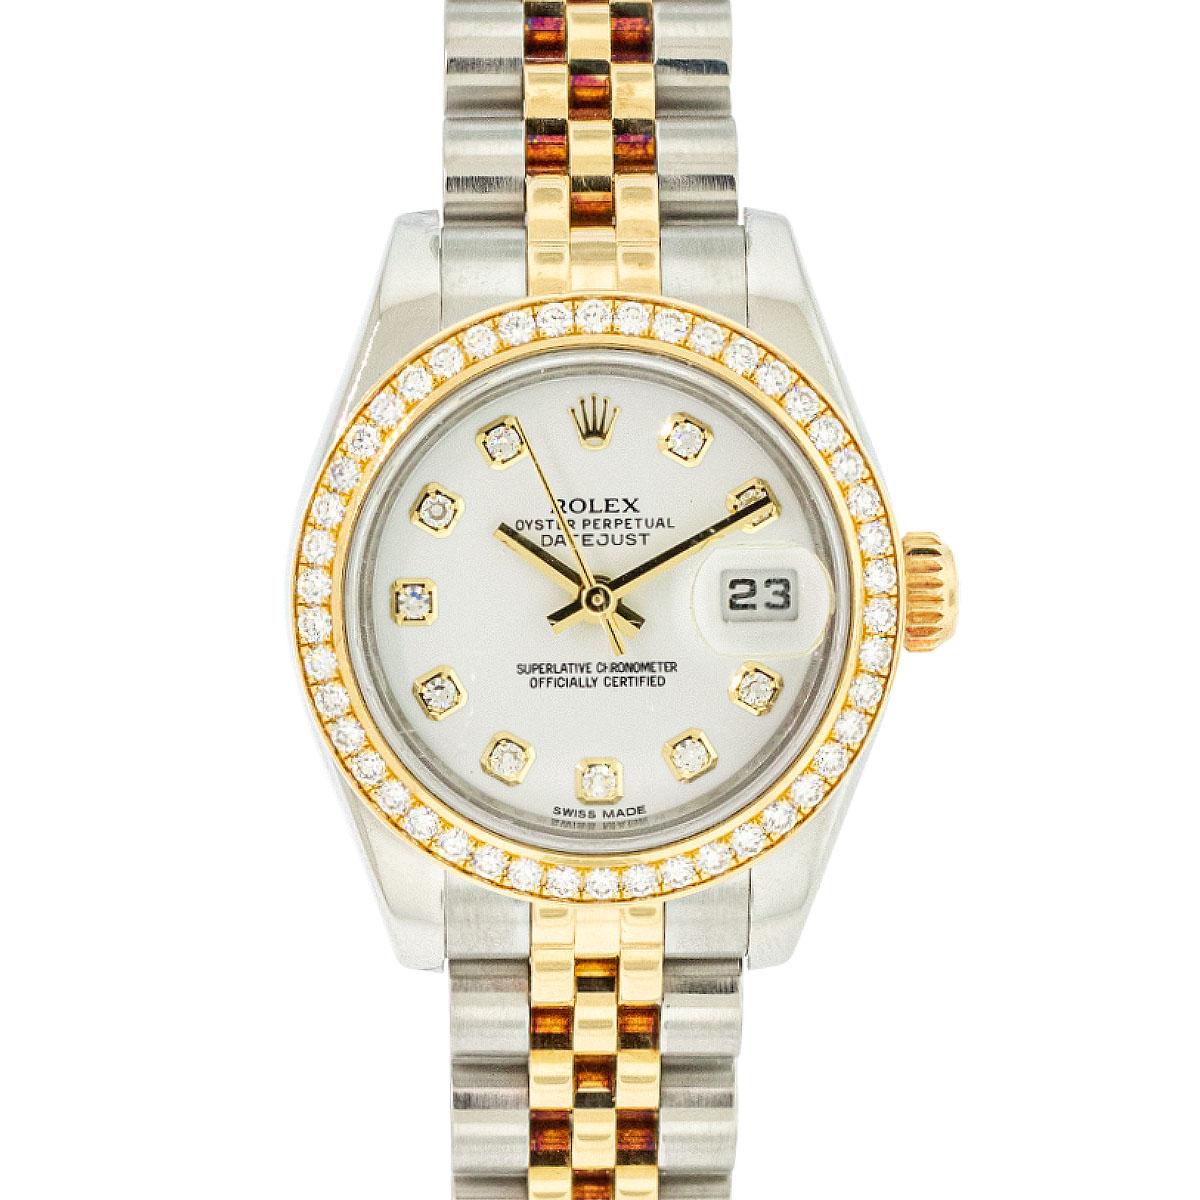 Rolex 179383 Datejust 26mm Two Tone Ladies Watch

When it comes to timeless beauty and precision craftsmanship, few names resonate as strongly as Rolex. The Rolex 179383 Datejust 26mm Two Tone Ladies Watch is a shining example of the brand's